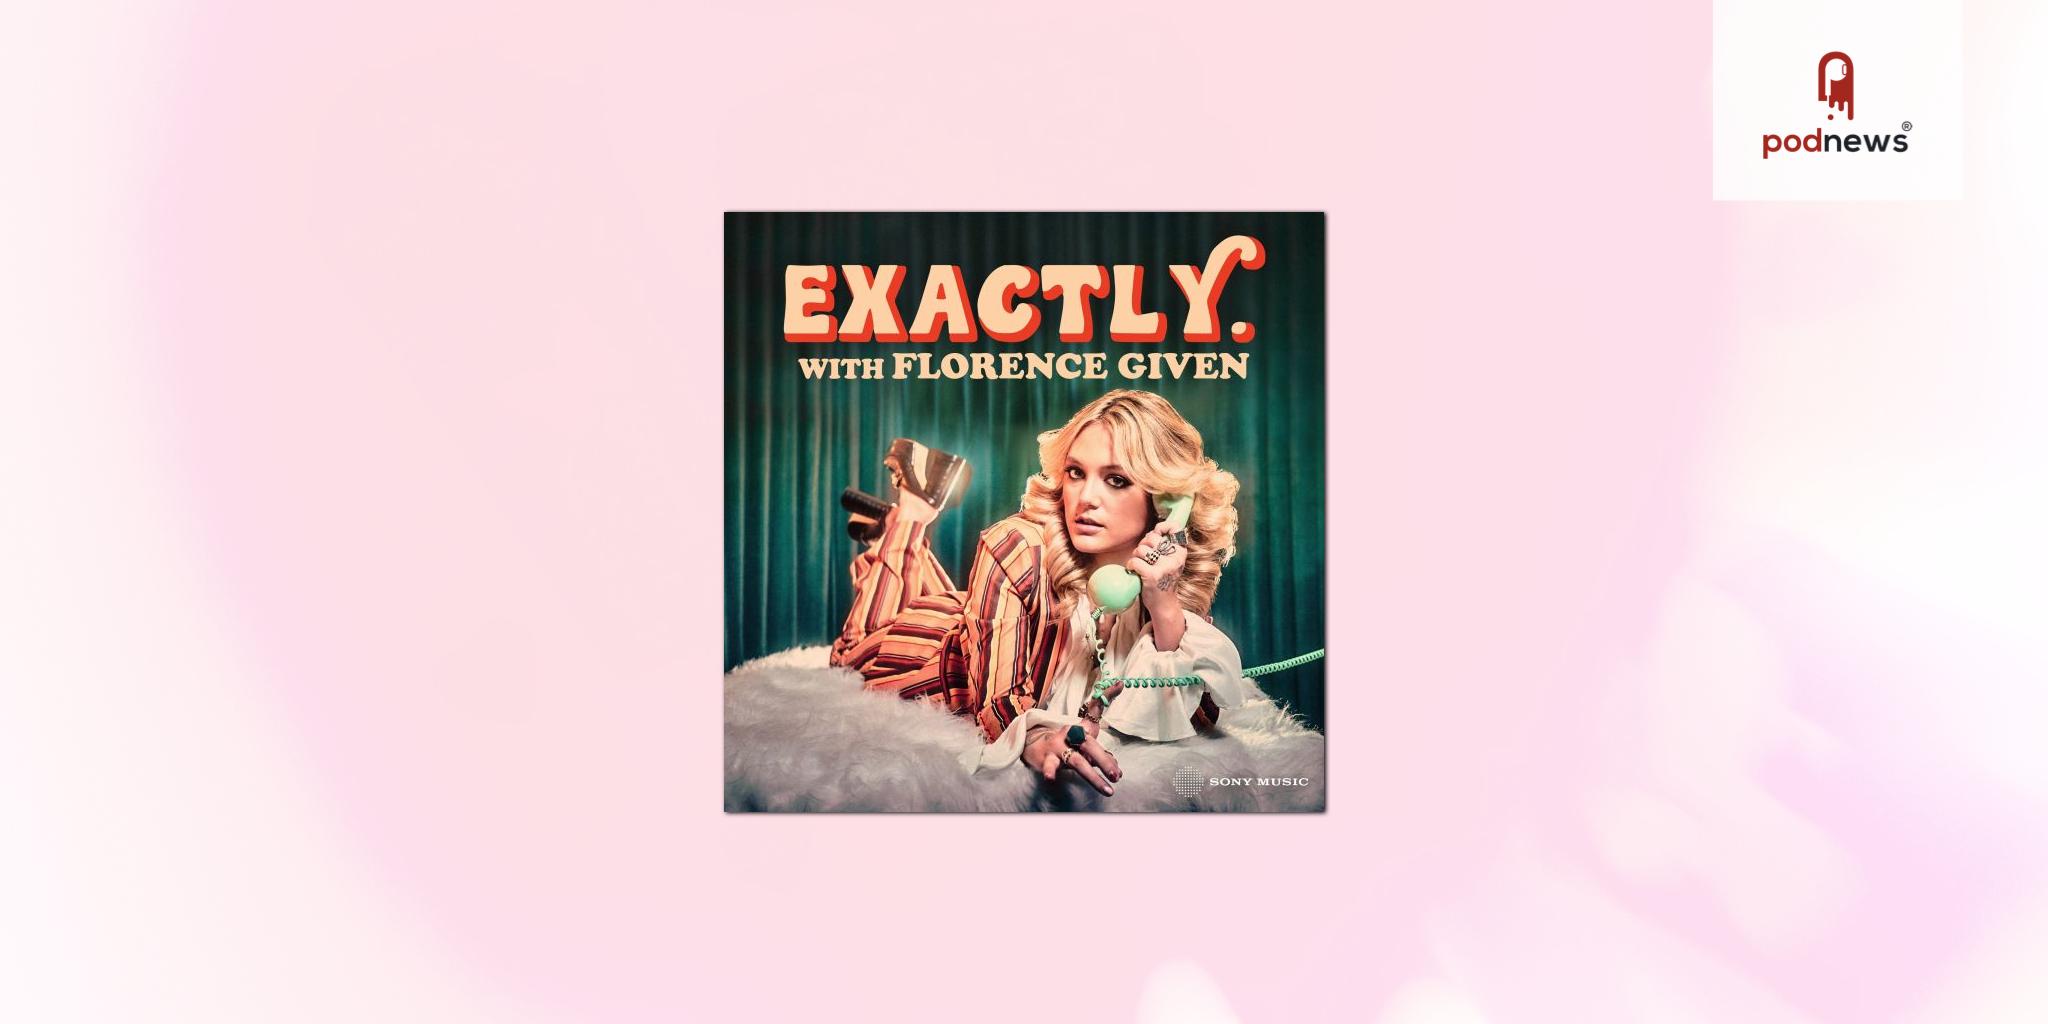 Florence Given premieres new podcast - Exactly. With Florence Given